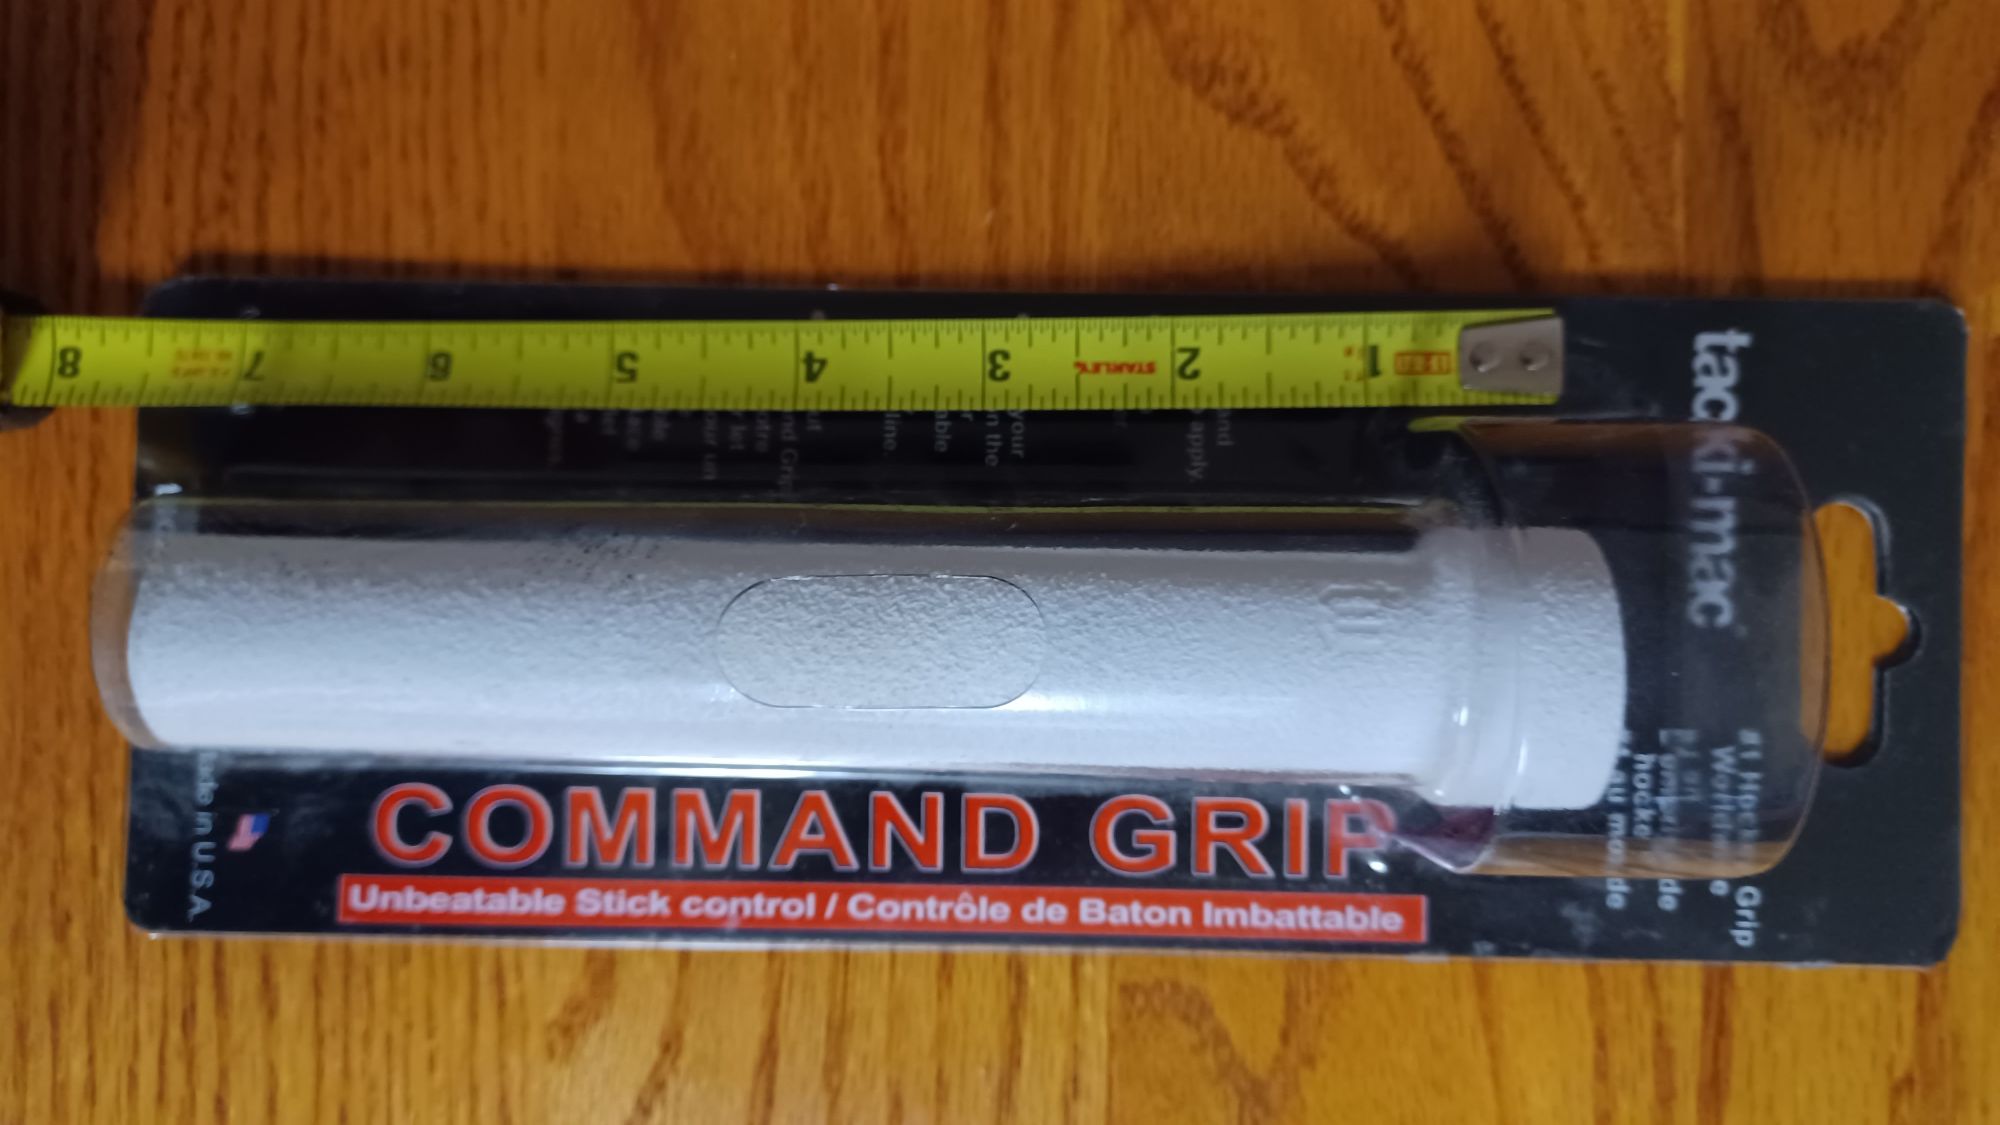 Tacki-mac command grip for top of players hockey stick - white - 7" long